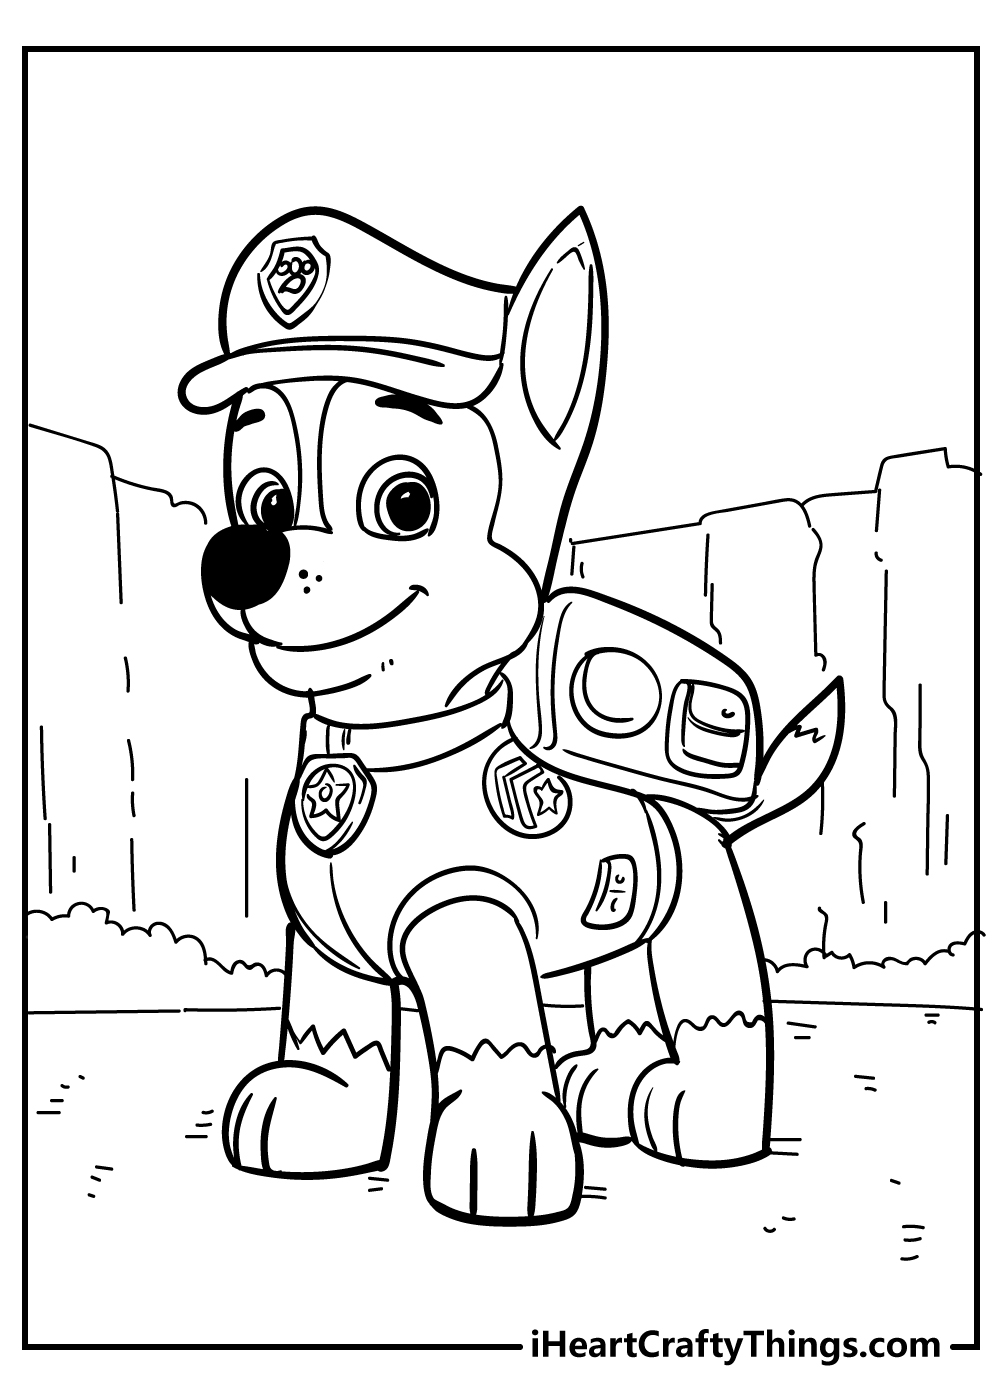 Paw Patrol Coloring Pages 2022)